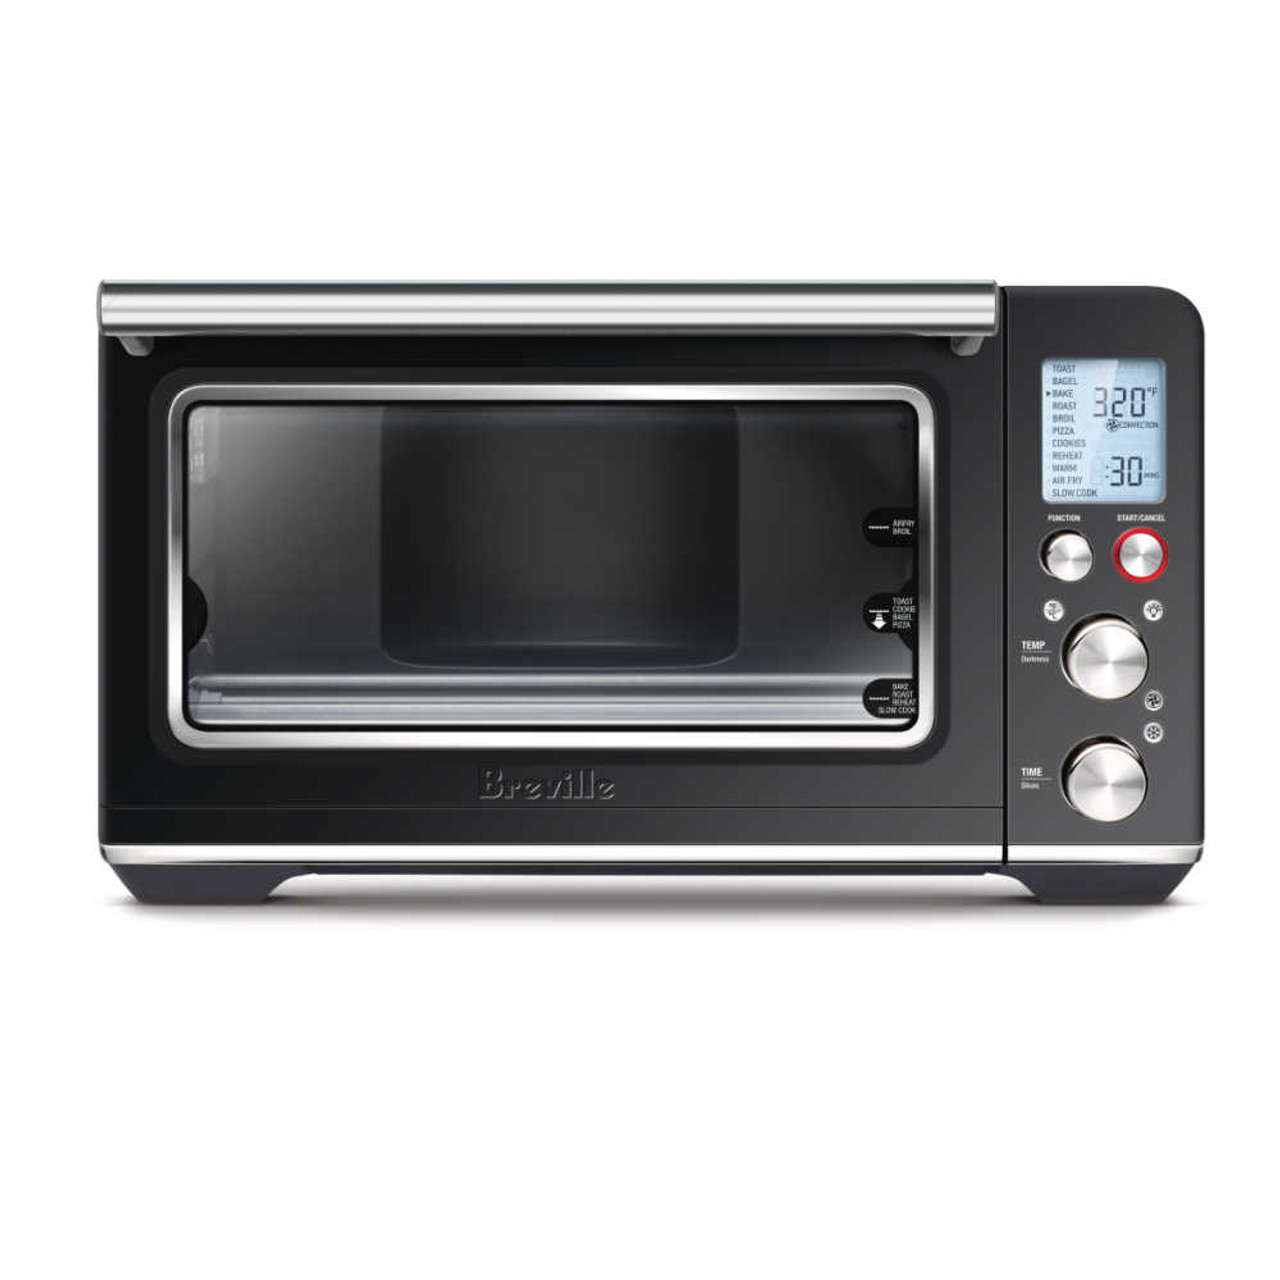 https://cdn11.bigcommerce.com/s-hccytny0od/images/stencil/1280x1280/products/4243/25127/Breville_Smart_Oven_Air_Fryer_in_Black_Truffle__63931.1699560374.jpg?c=2?imbypass=on